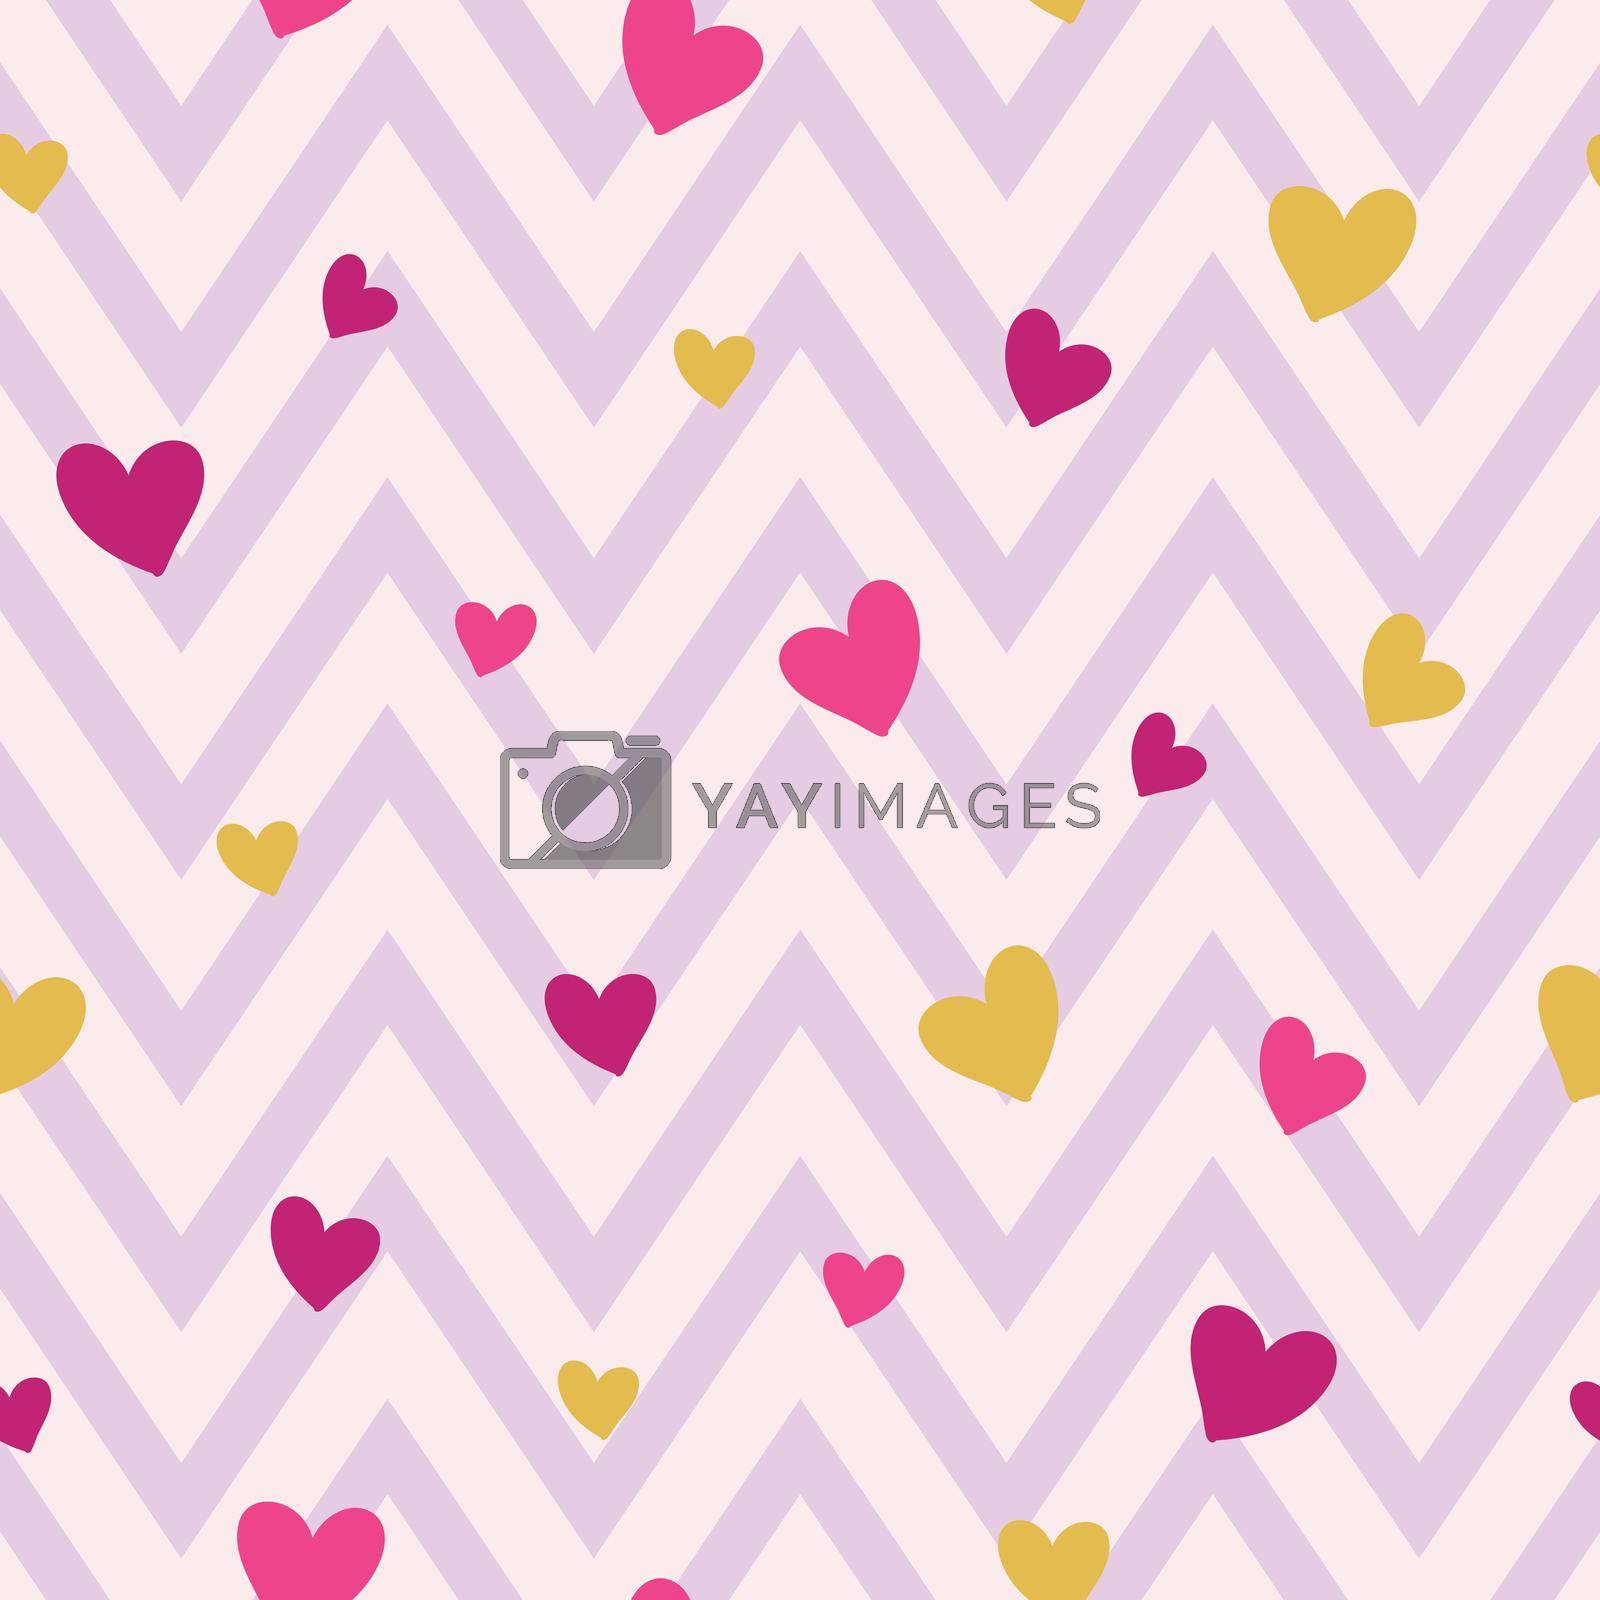 Royalty free image of Seamless pattern with pink and gold hearts on pink chevron background by elinnet